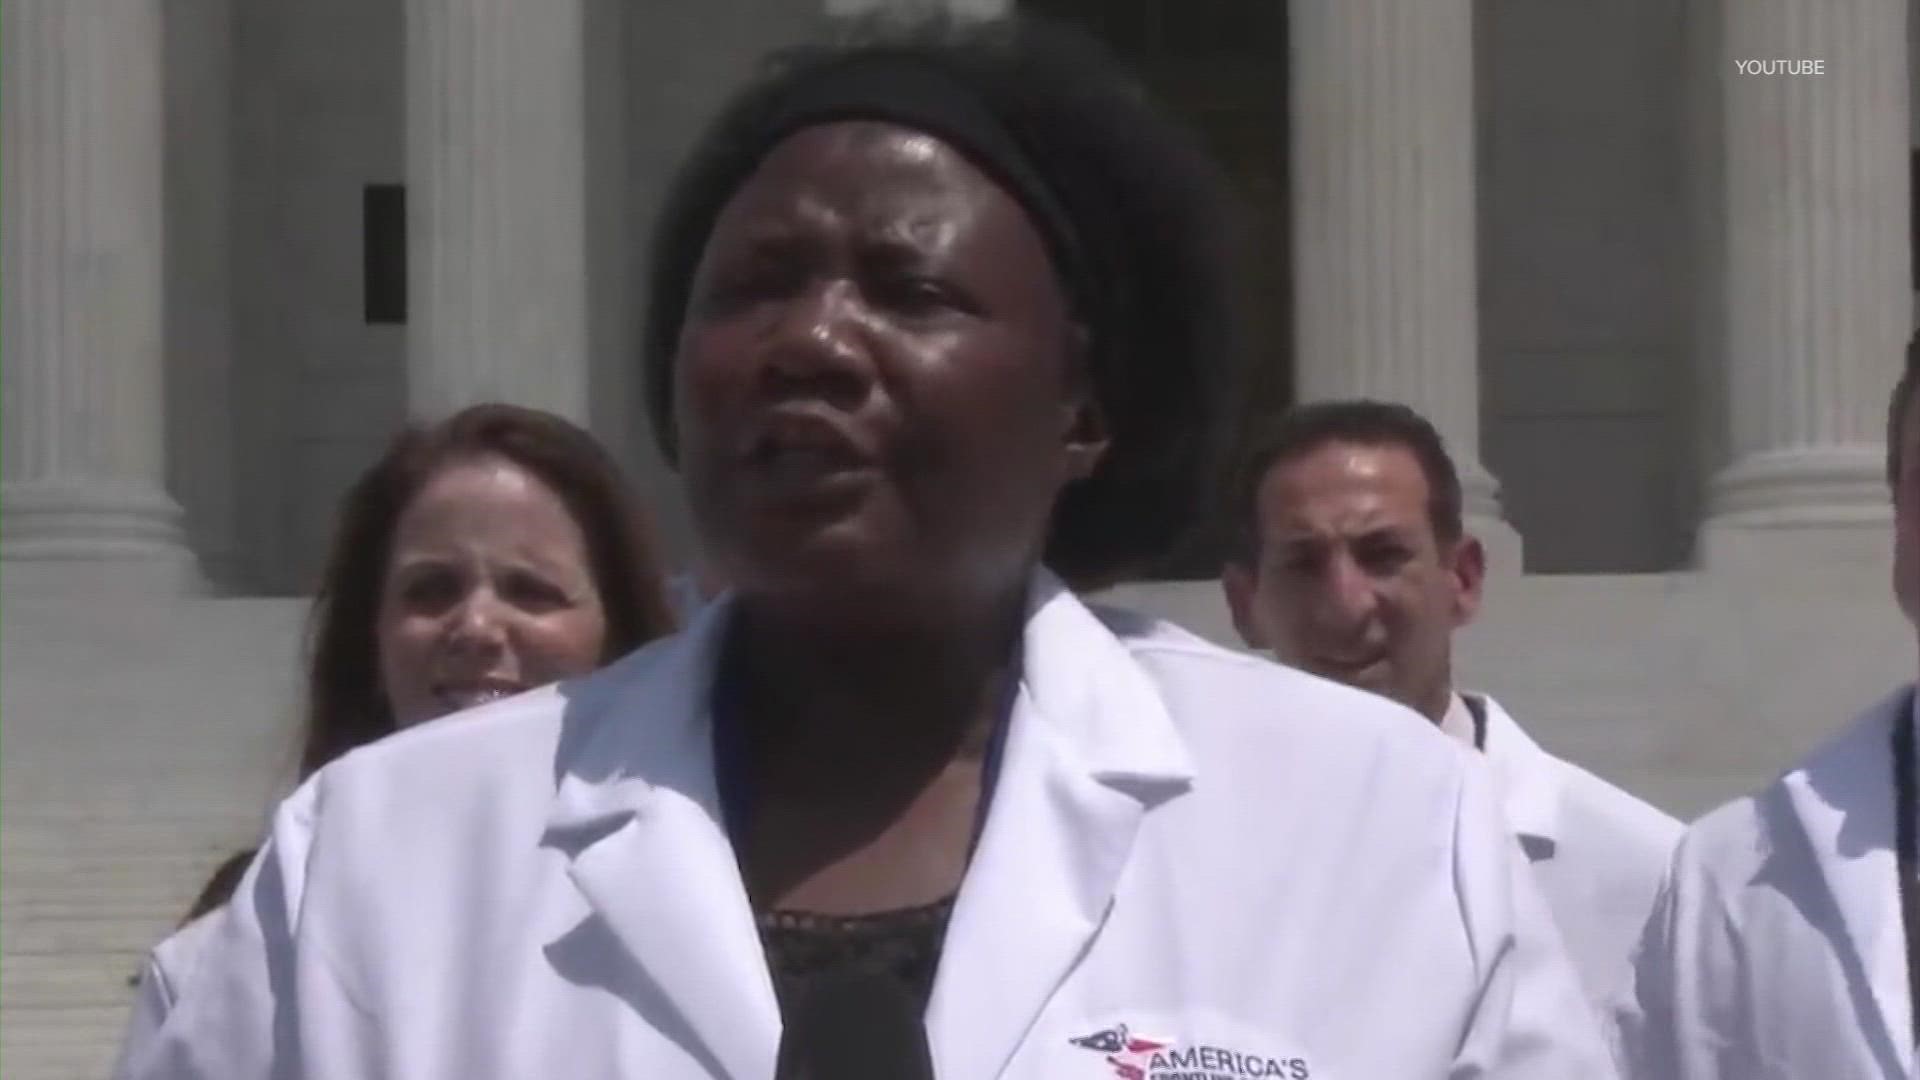 Texas Medical Board has taken 'corrective action' against Dr. Stella Immanuel over a hydroxychloroquine prescription she gave to a COVID patient.